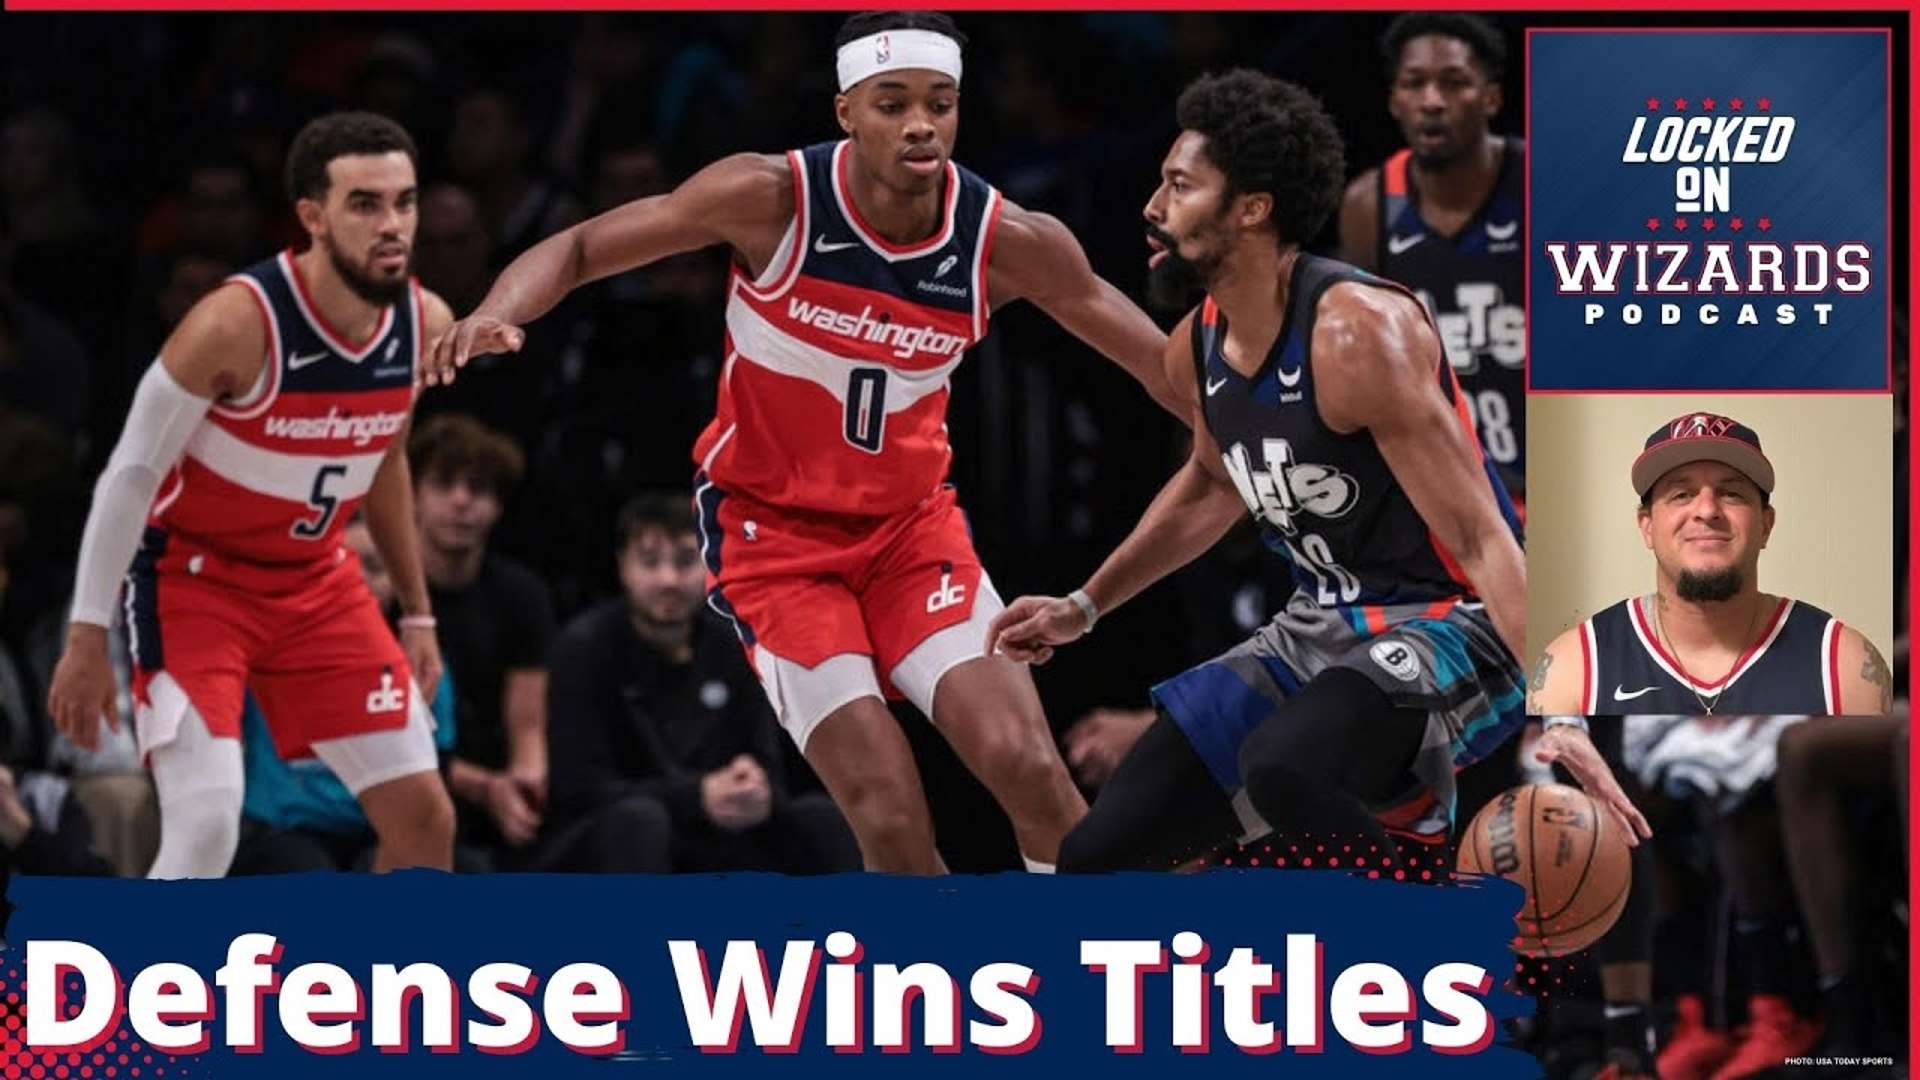 Brandon breaks down the candidates for the best defender this season for the Wizards. Can Johnny Davis figure it out in DC? Mock Kyle Kuzma trade to the Pistons.